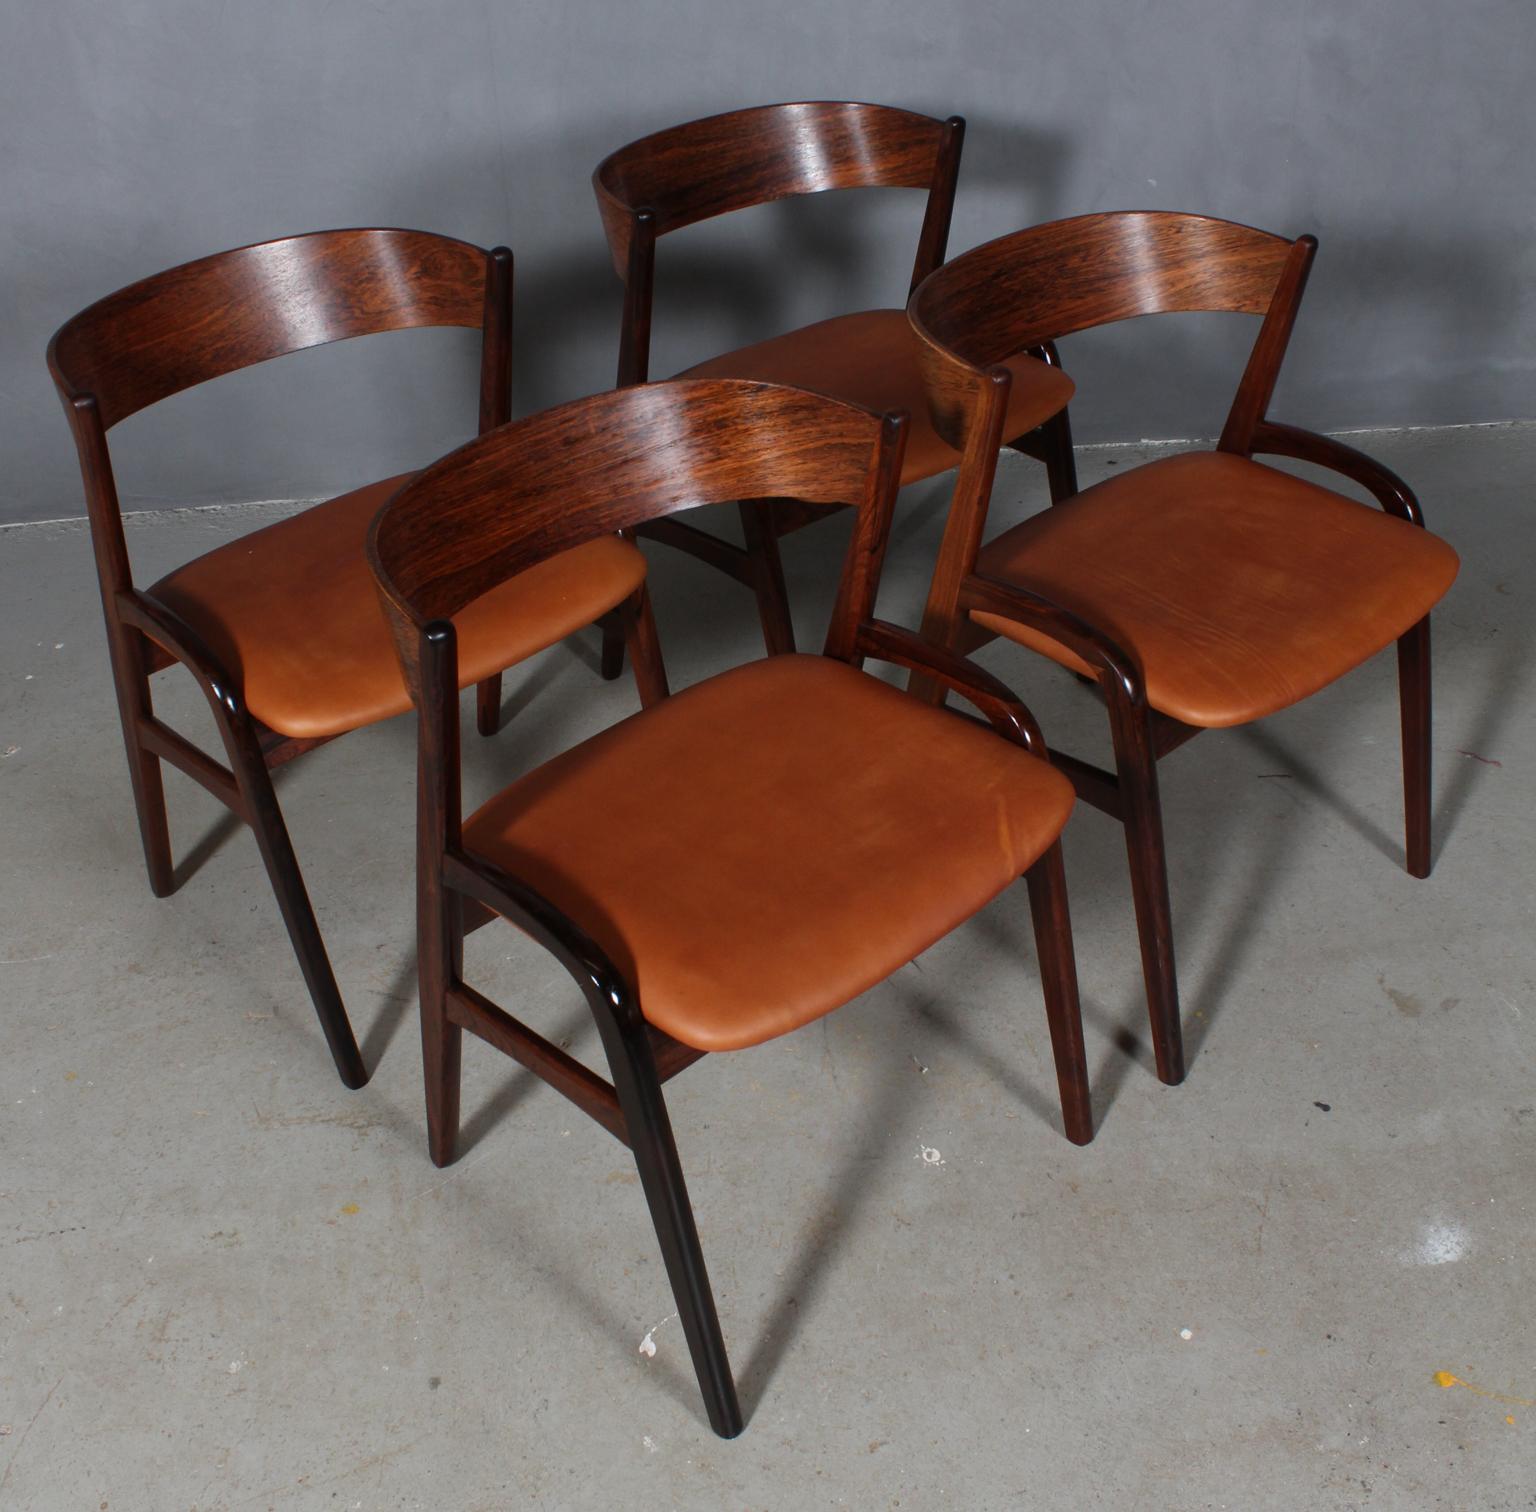 Danish cabinetmaker set of four chairs in rosewood. 

Seats new upholstered with vintage tan aniline leather.

Made in the 1960s.